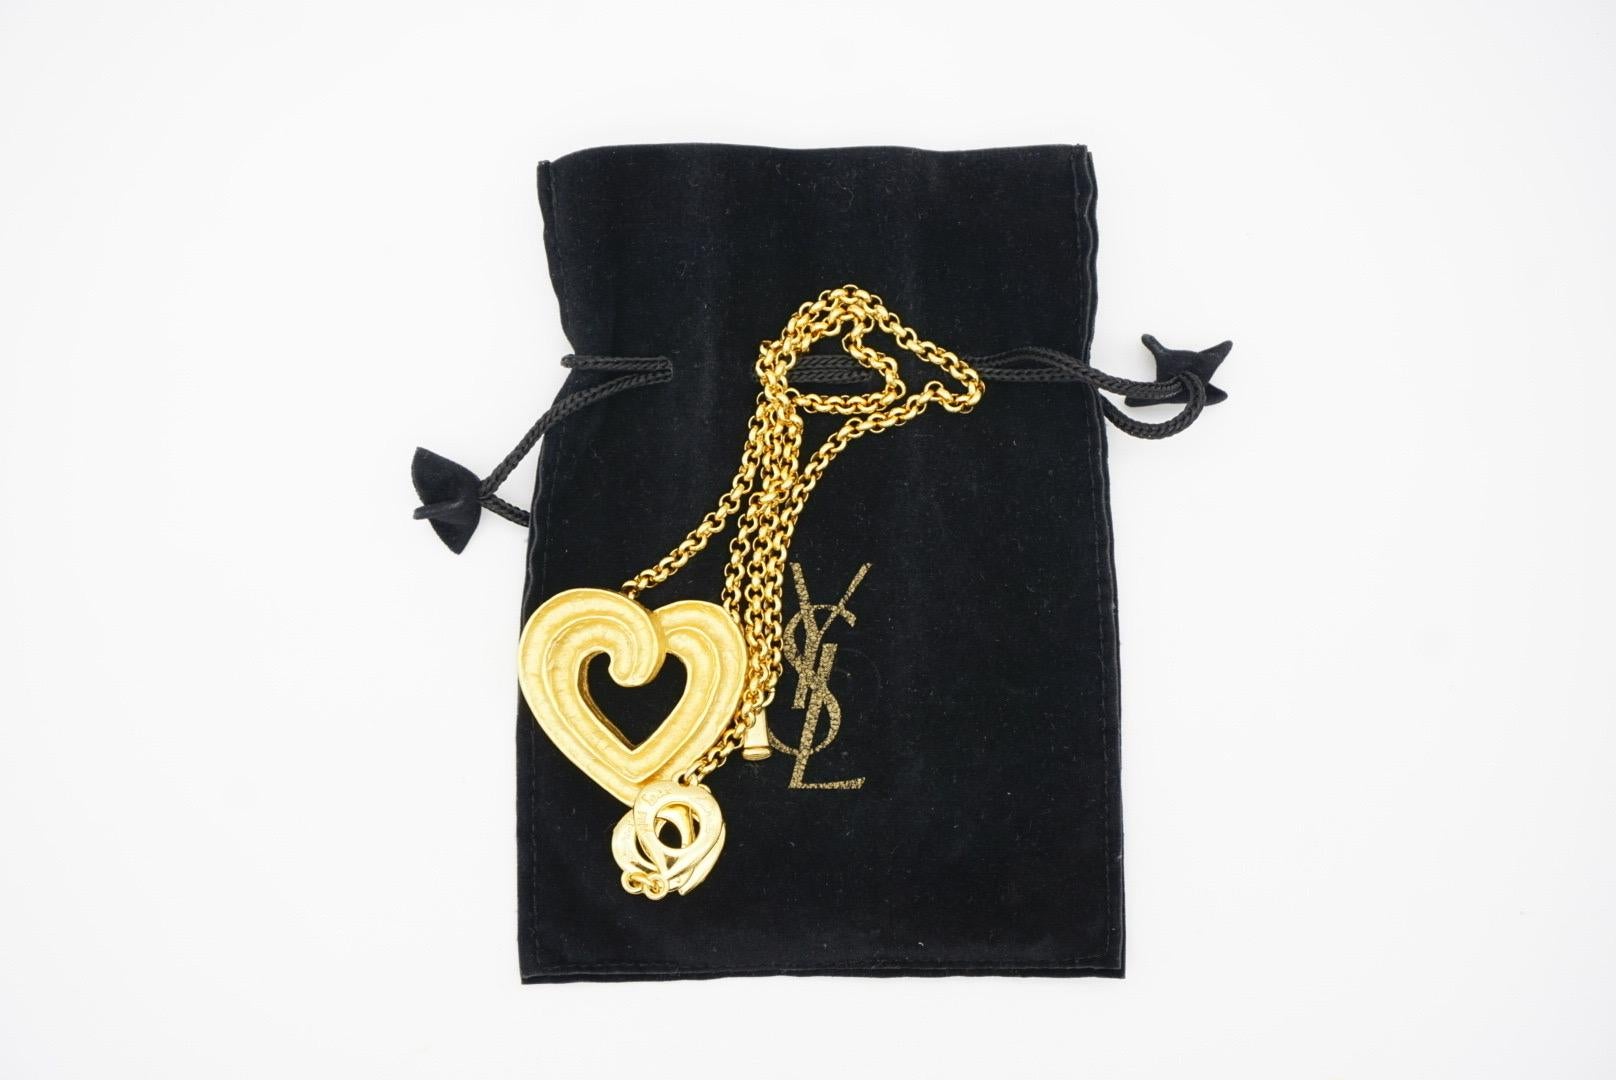 Yves Saint Laurent YSL Vintage Large Heart Love Openwork Pendant Gold Necklace  In Excellent Condition For Sale In Wokingham, England